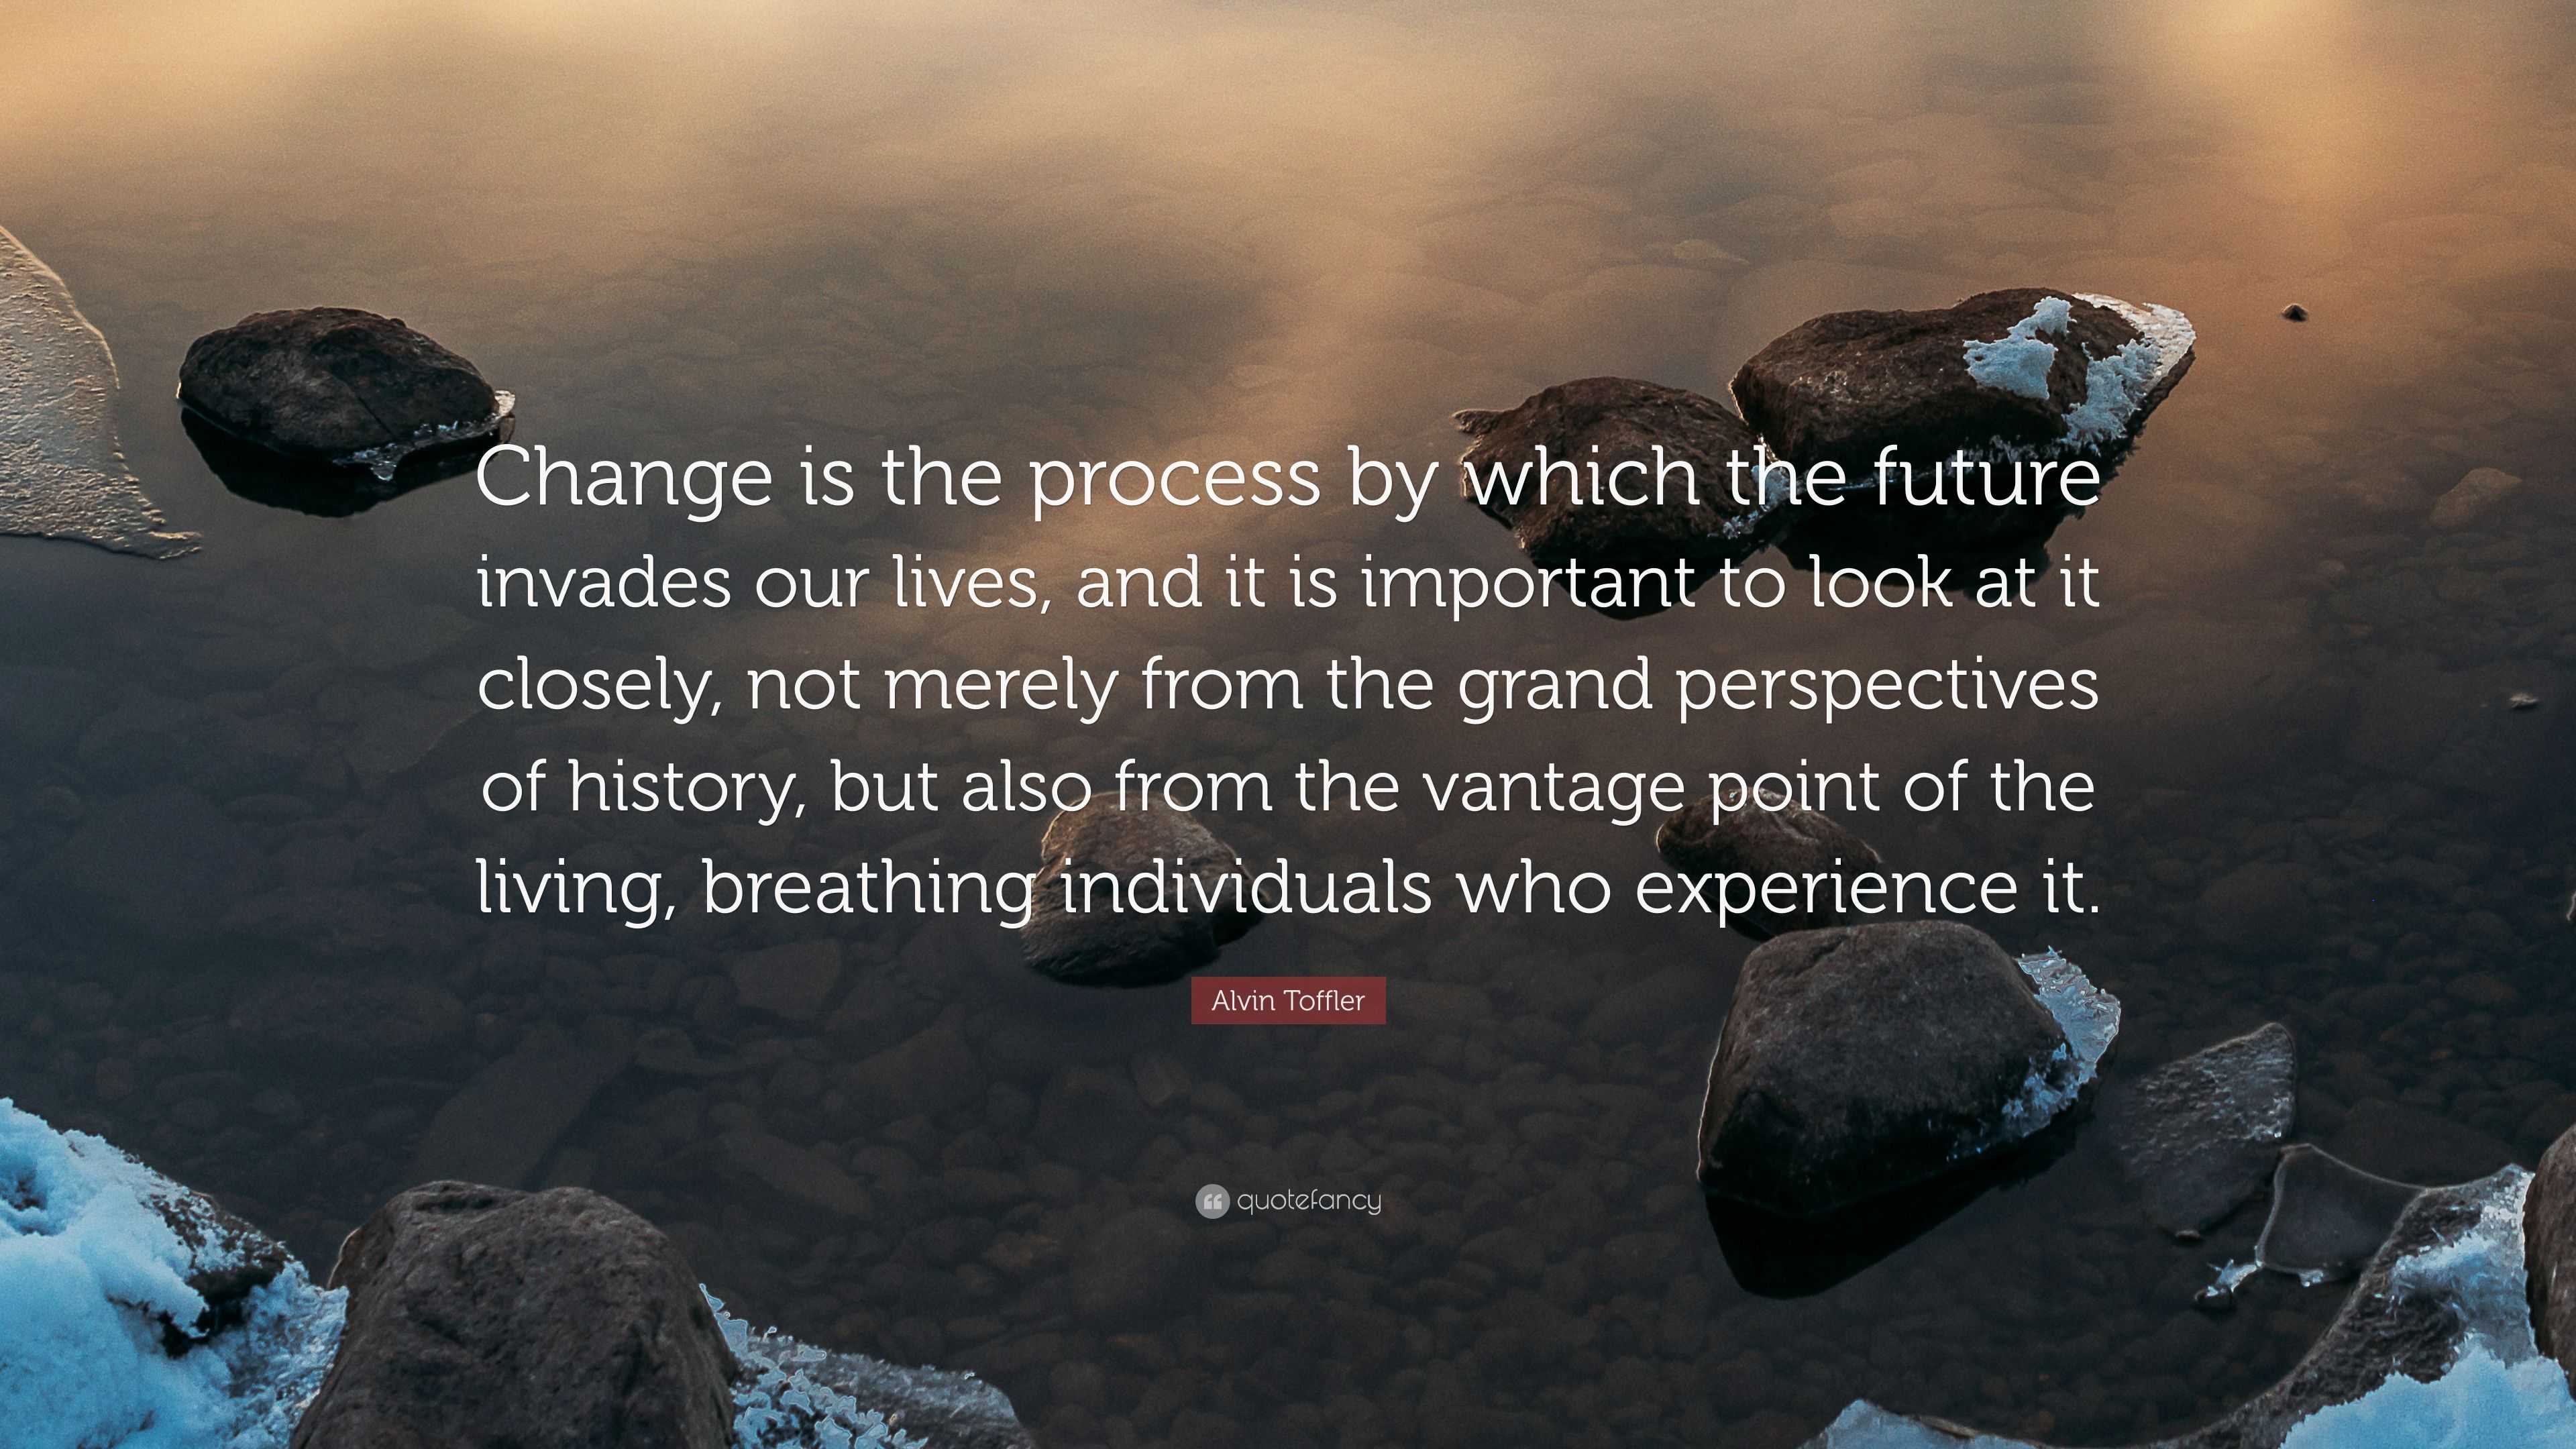 Alvin Toffler Quote: “Change is the process by which the future invades our  lives, and it is important to look at it closely, not merely from ”